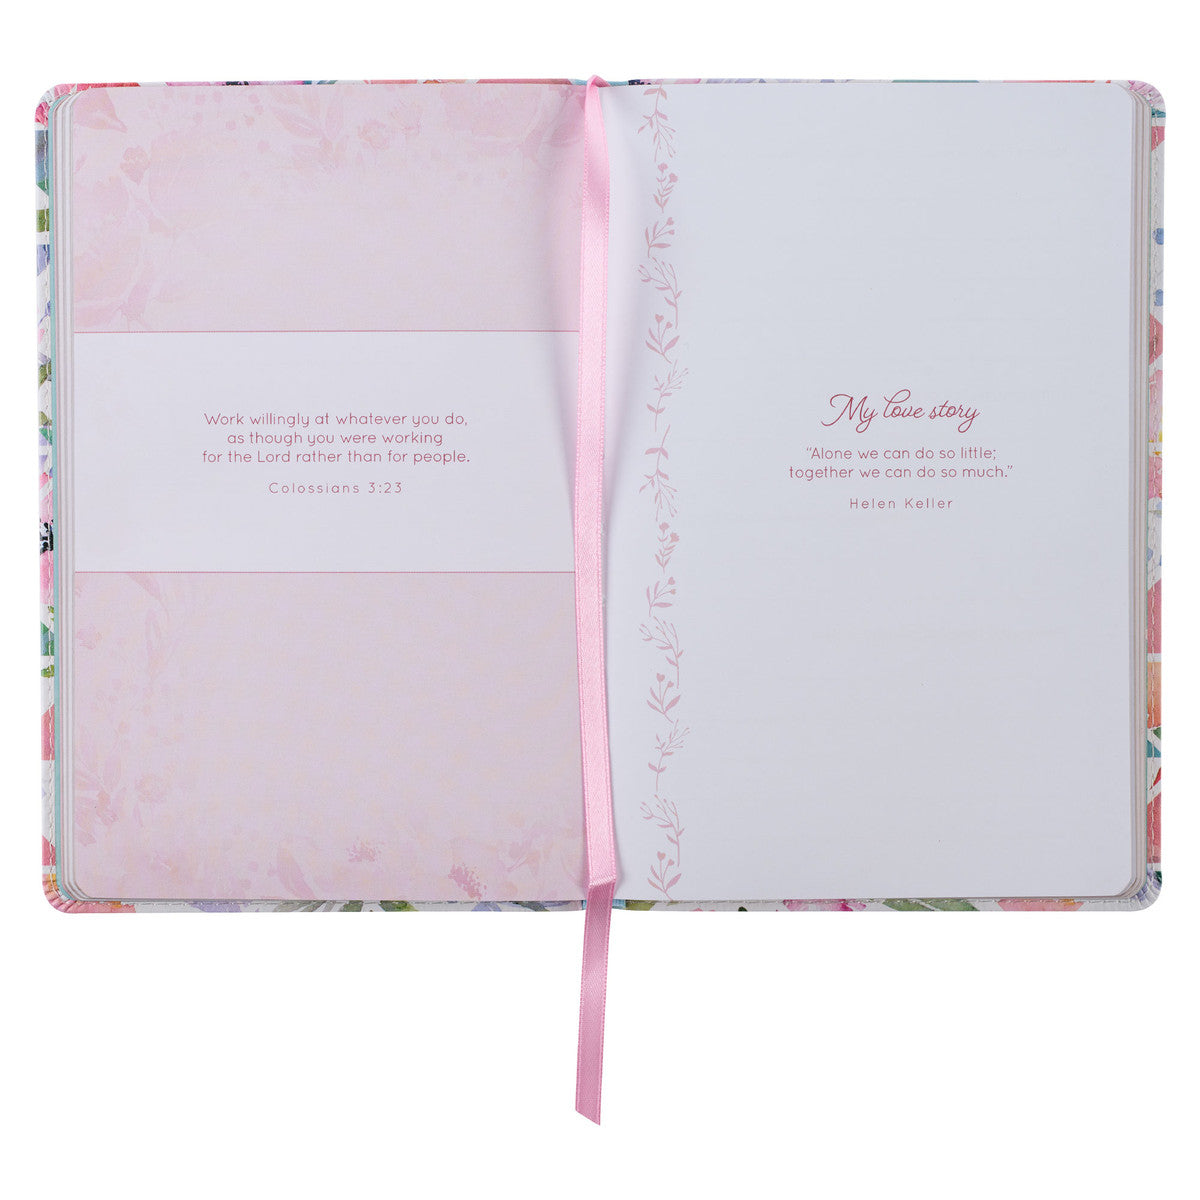 My Life, My Story, Mother's Legacy Journal - The Christian Gift Company